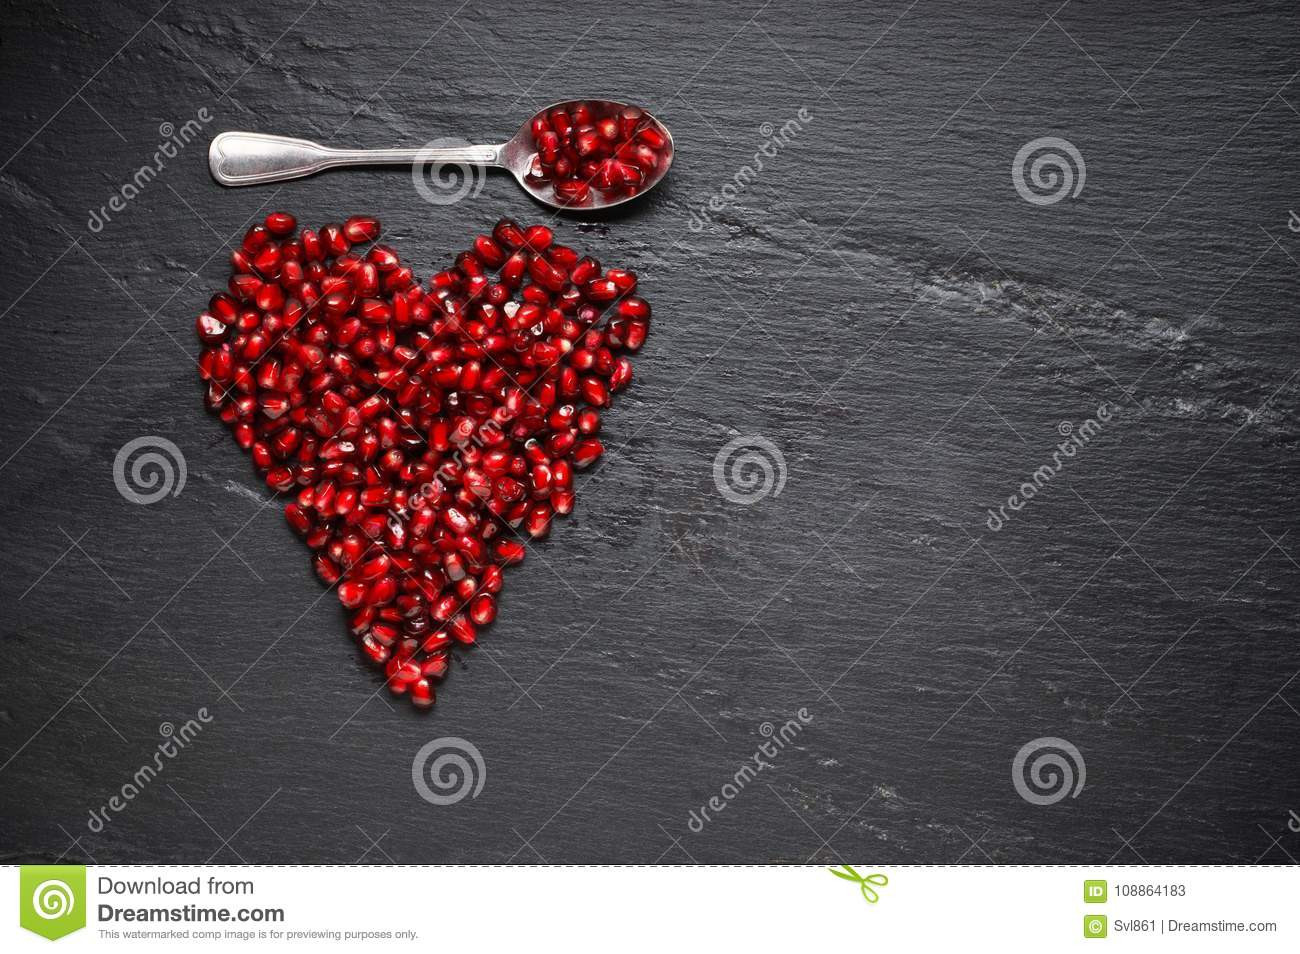 24 attractive Red Heart Shaped Vase 2024 free download red heart shaped vase of heart shaped pomegranate seeds stock image image of copy throughout download heart shaped pomegranate seeds stock image image of copy ingredient 108864183